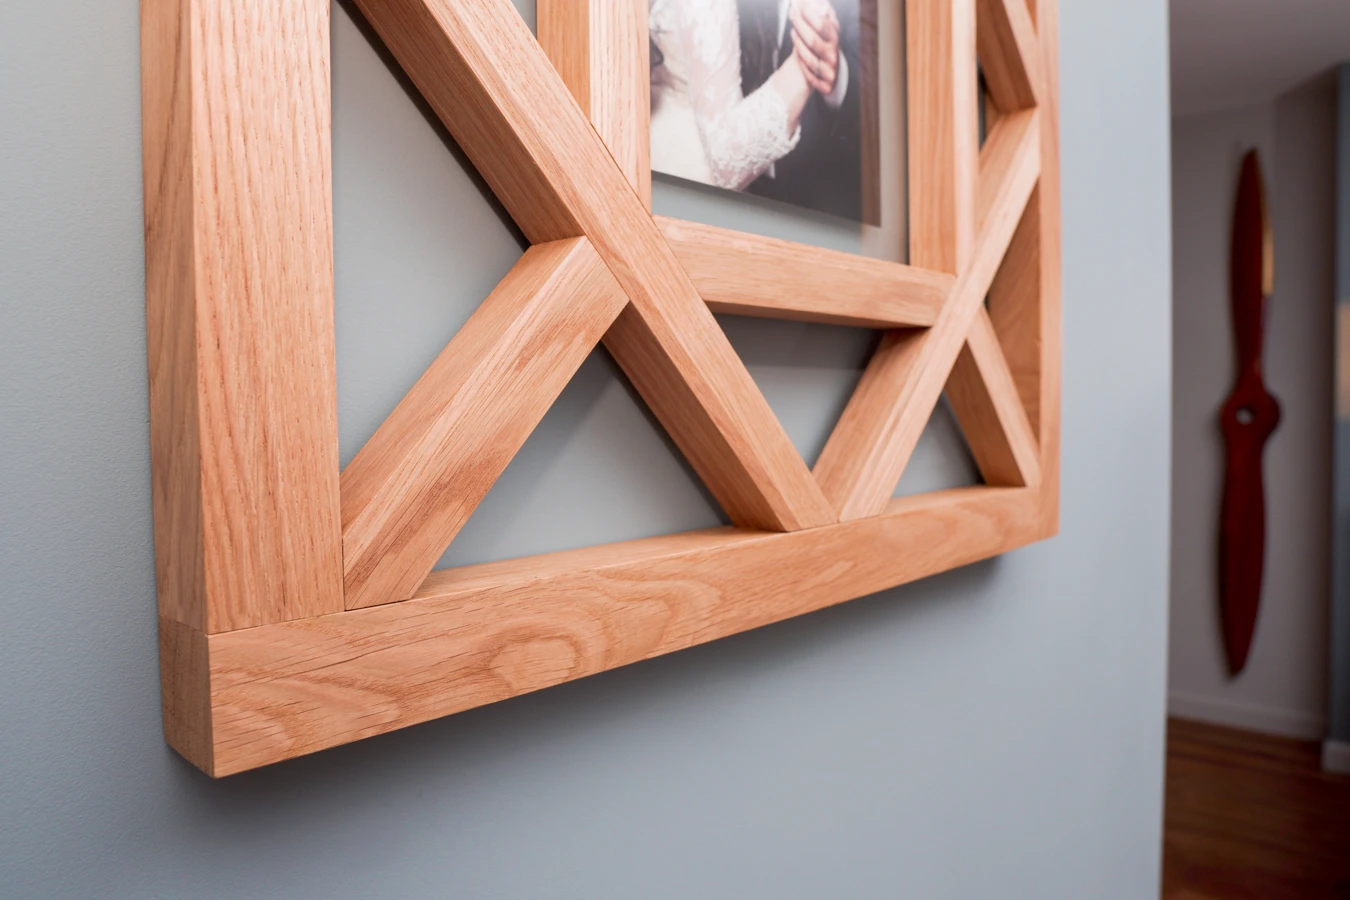 Detail video of the geometric design of this picture frame. It is made from staircase spindles/balustrades that you can get off the shelf.